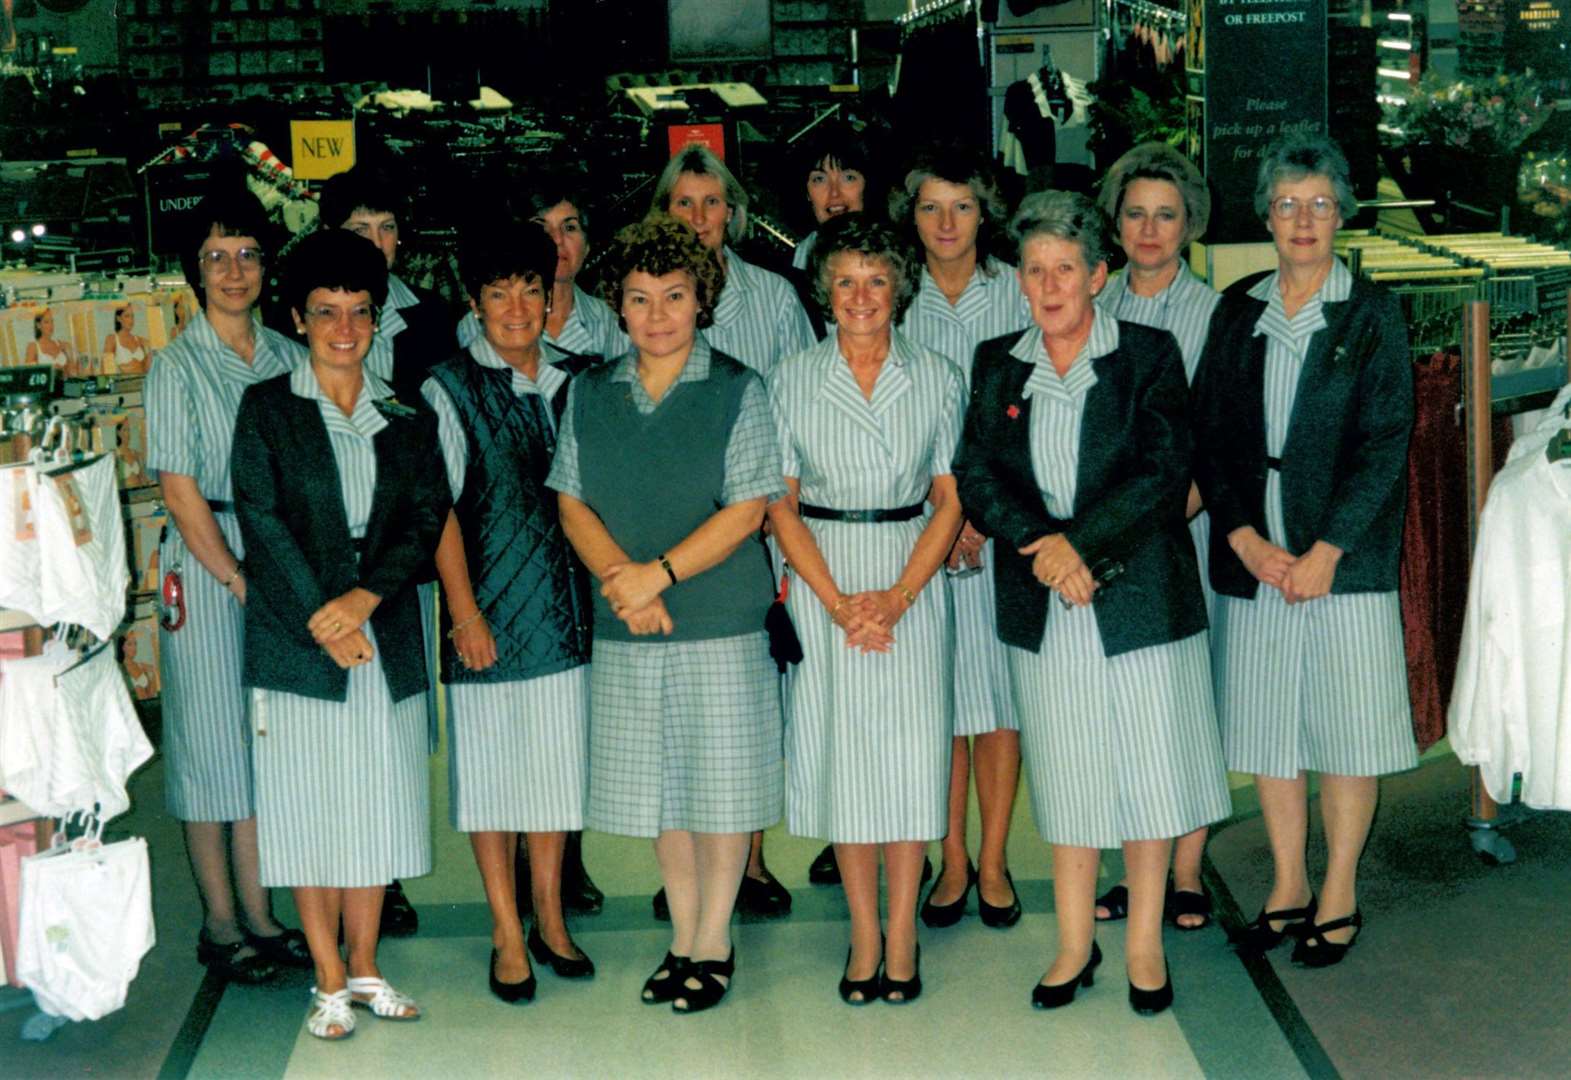 The shop's staff in 1985. Picture: M&S Archive/Steve Salter